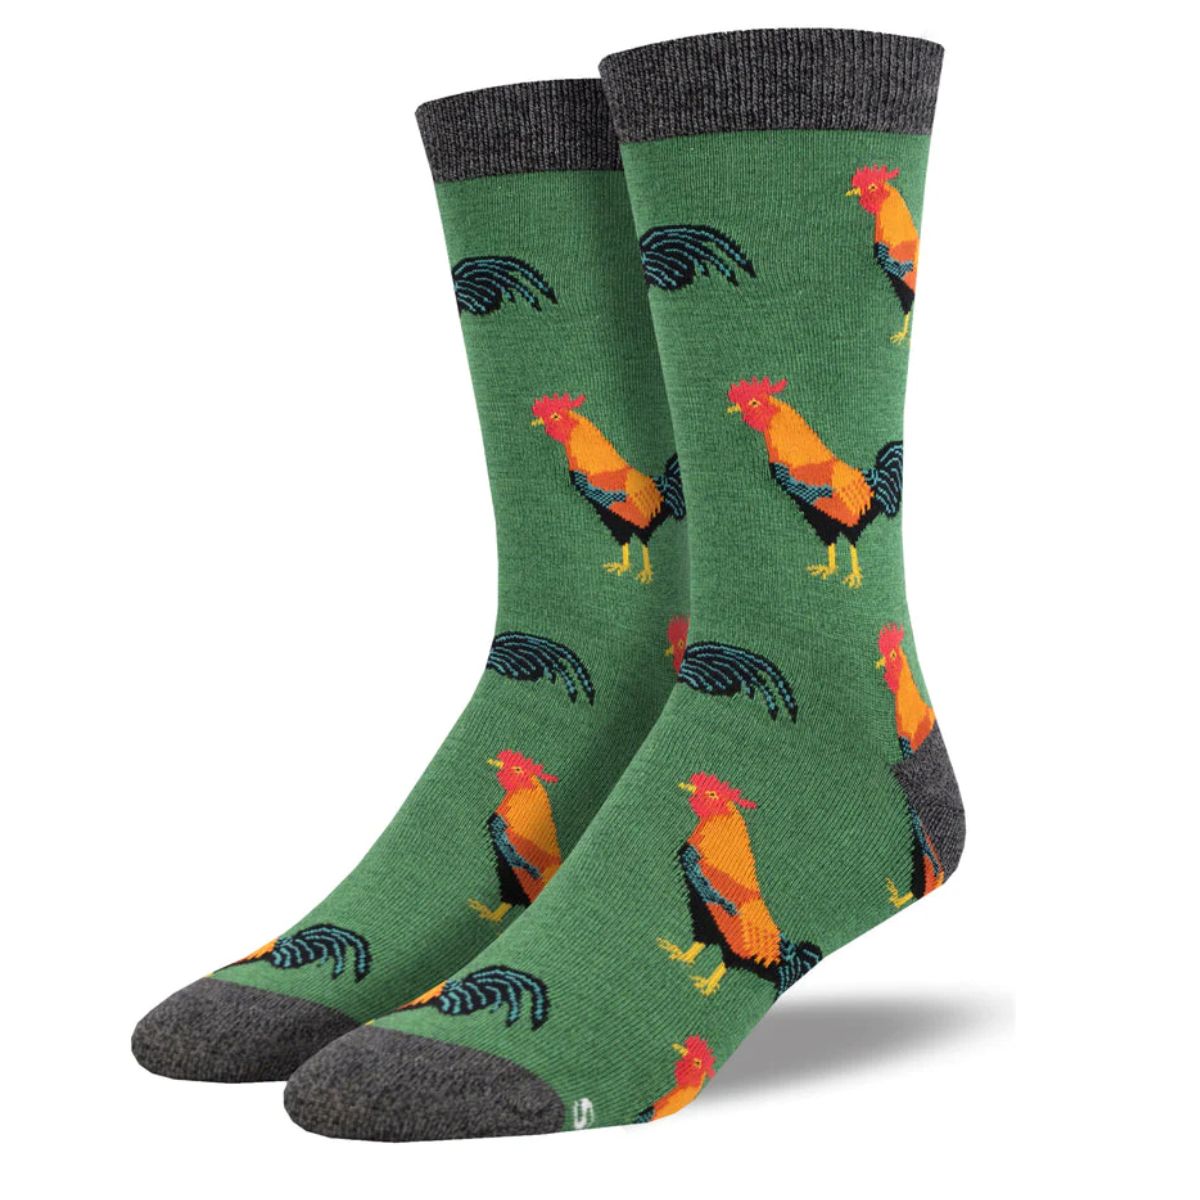 Flock of roosters socks a pair of green crew socks with rooster print